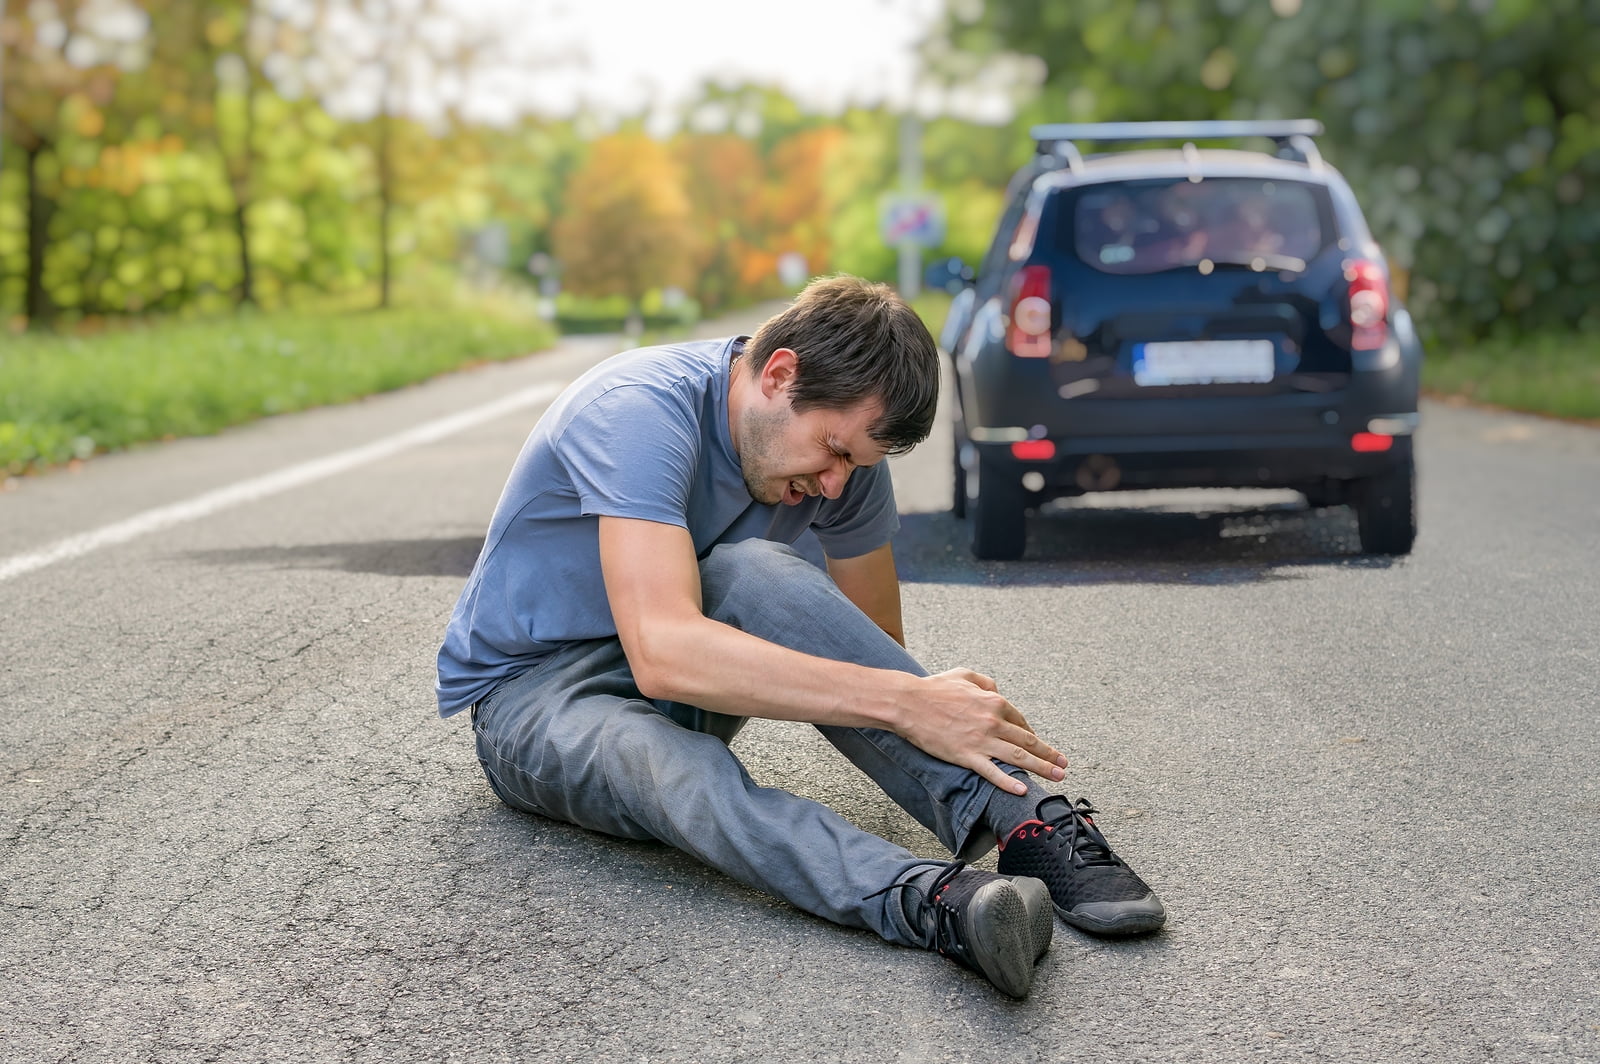 What Should You Do If a Pedestrian Is Hit by a Vehicle?